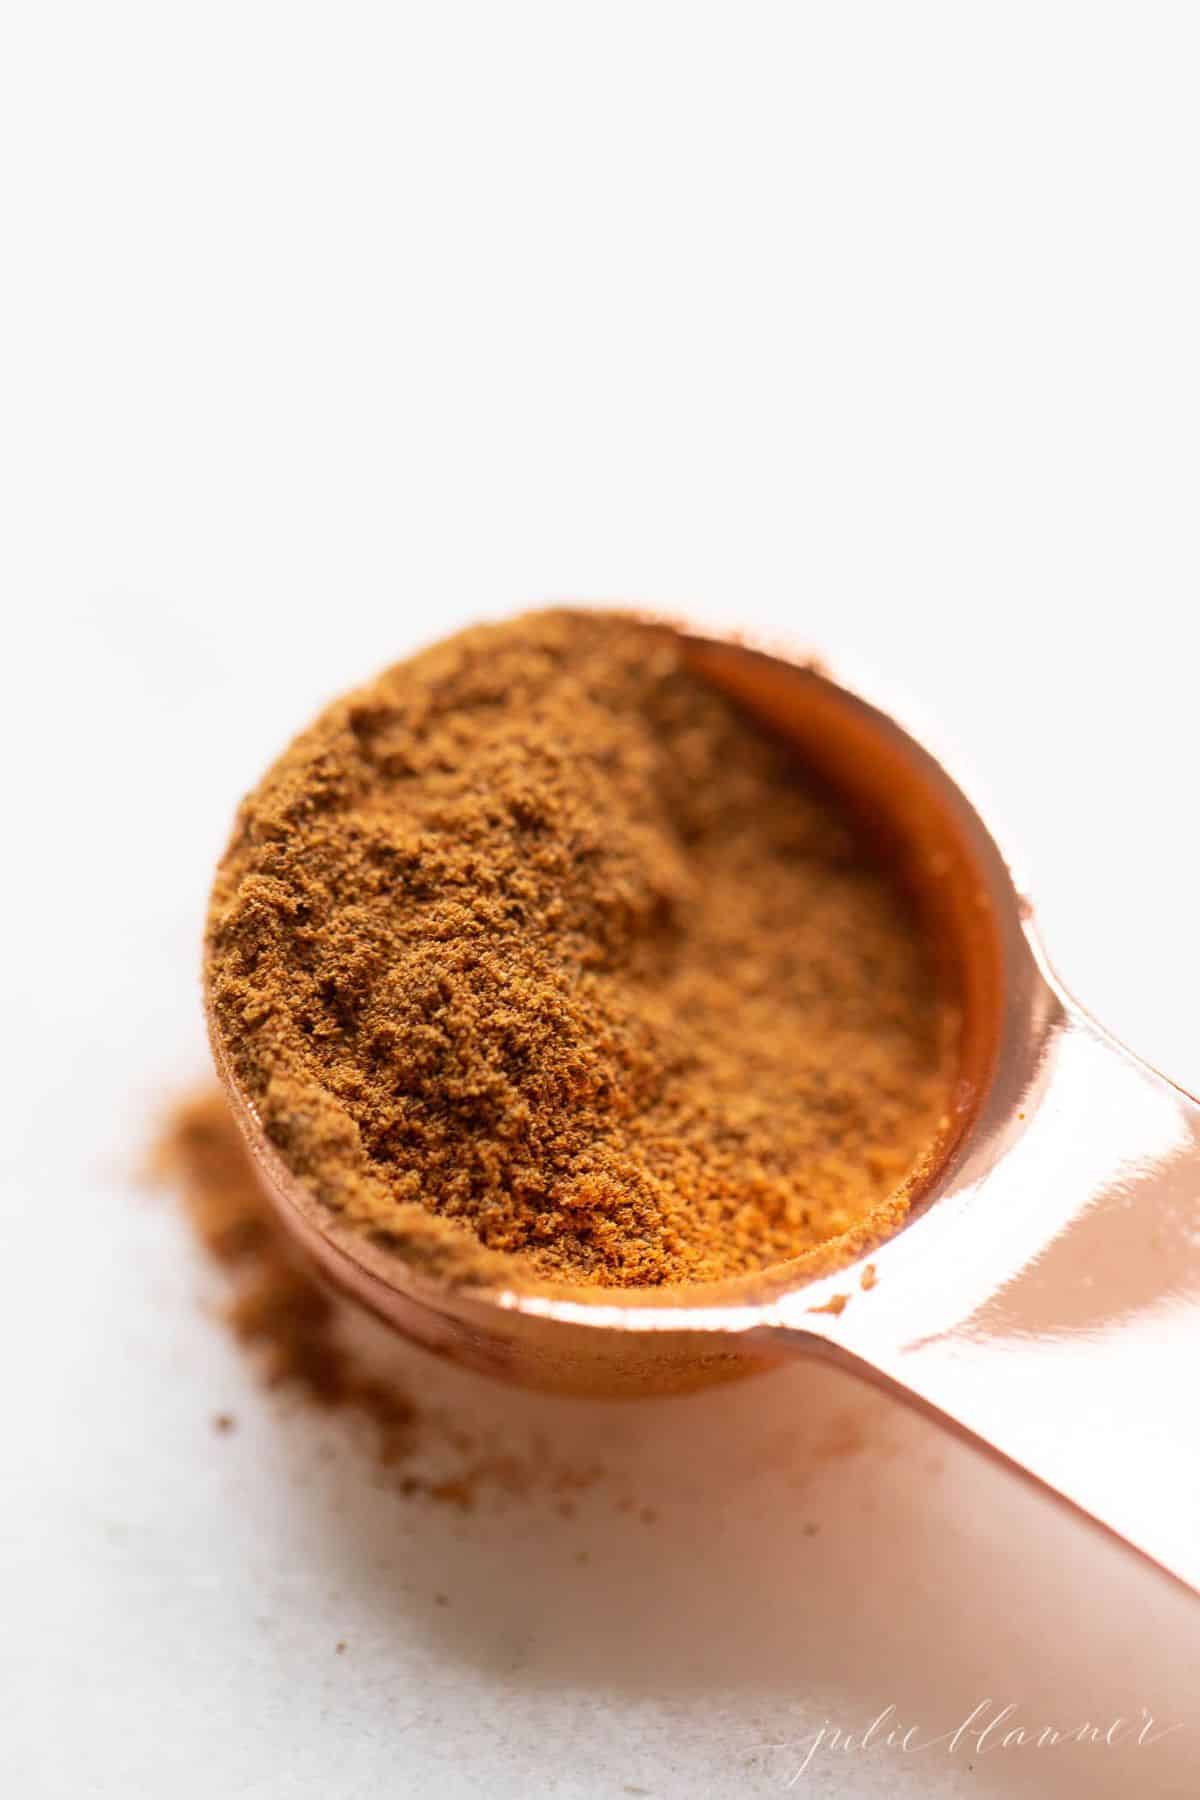 White surface, copper tablespoon filled with pumpkin pie spice mix, loose spices on surface.